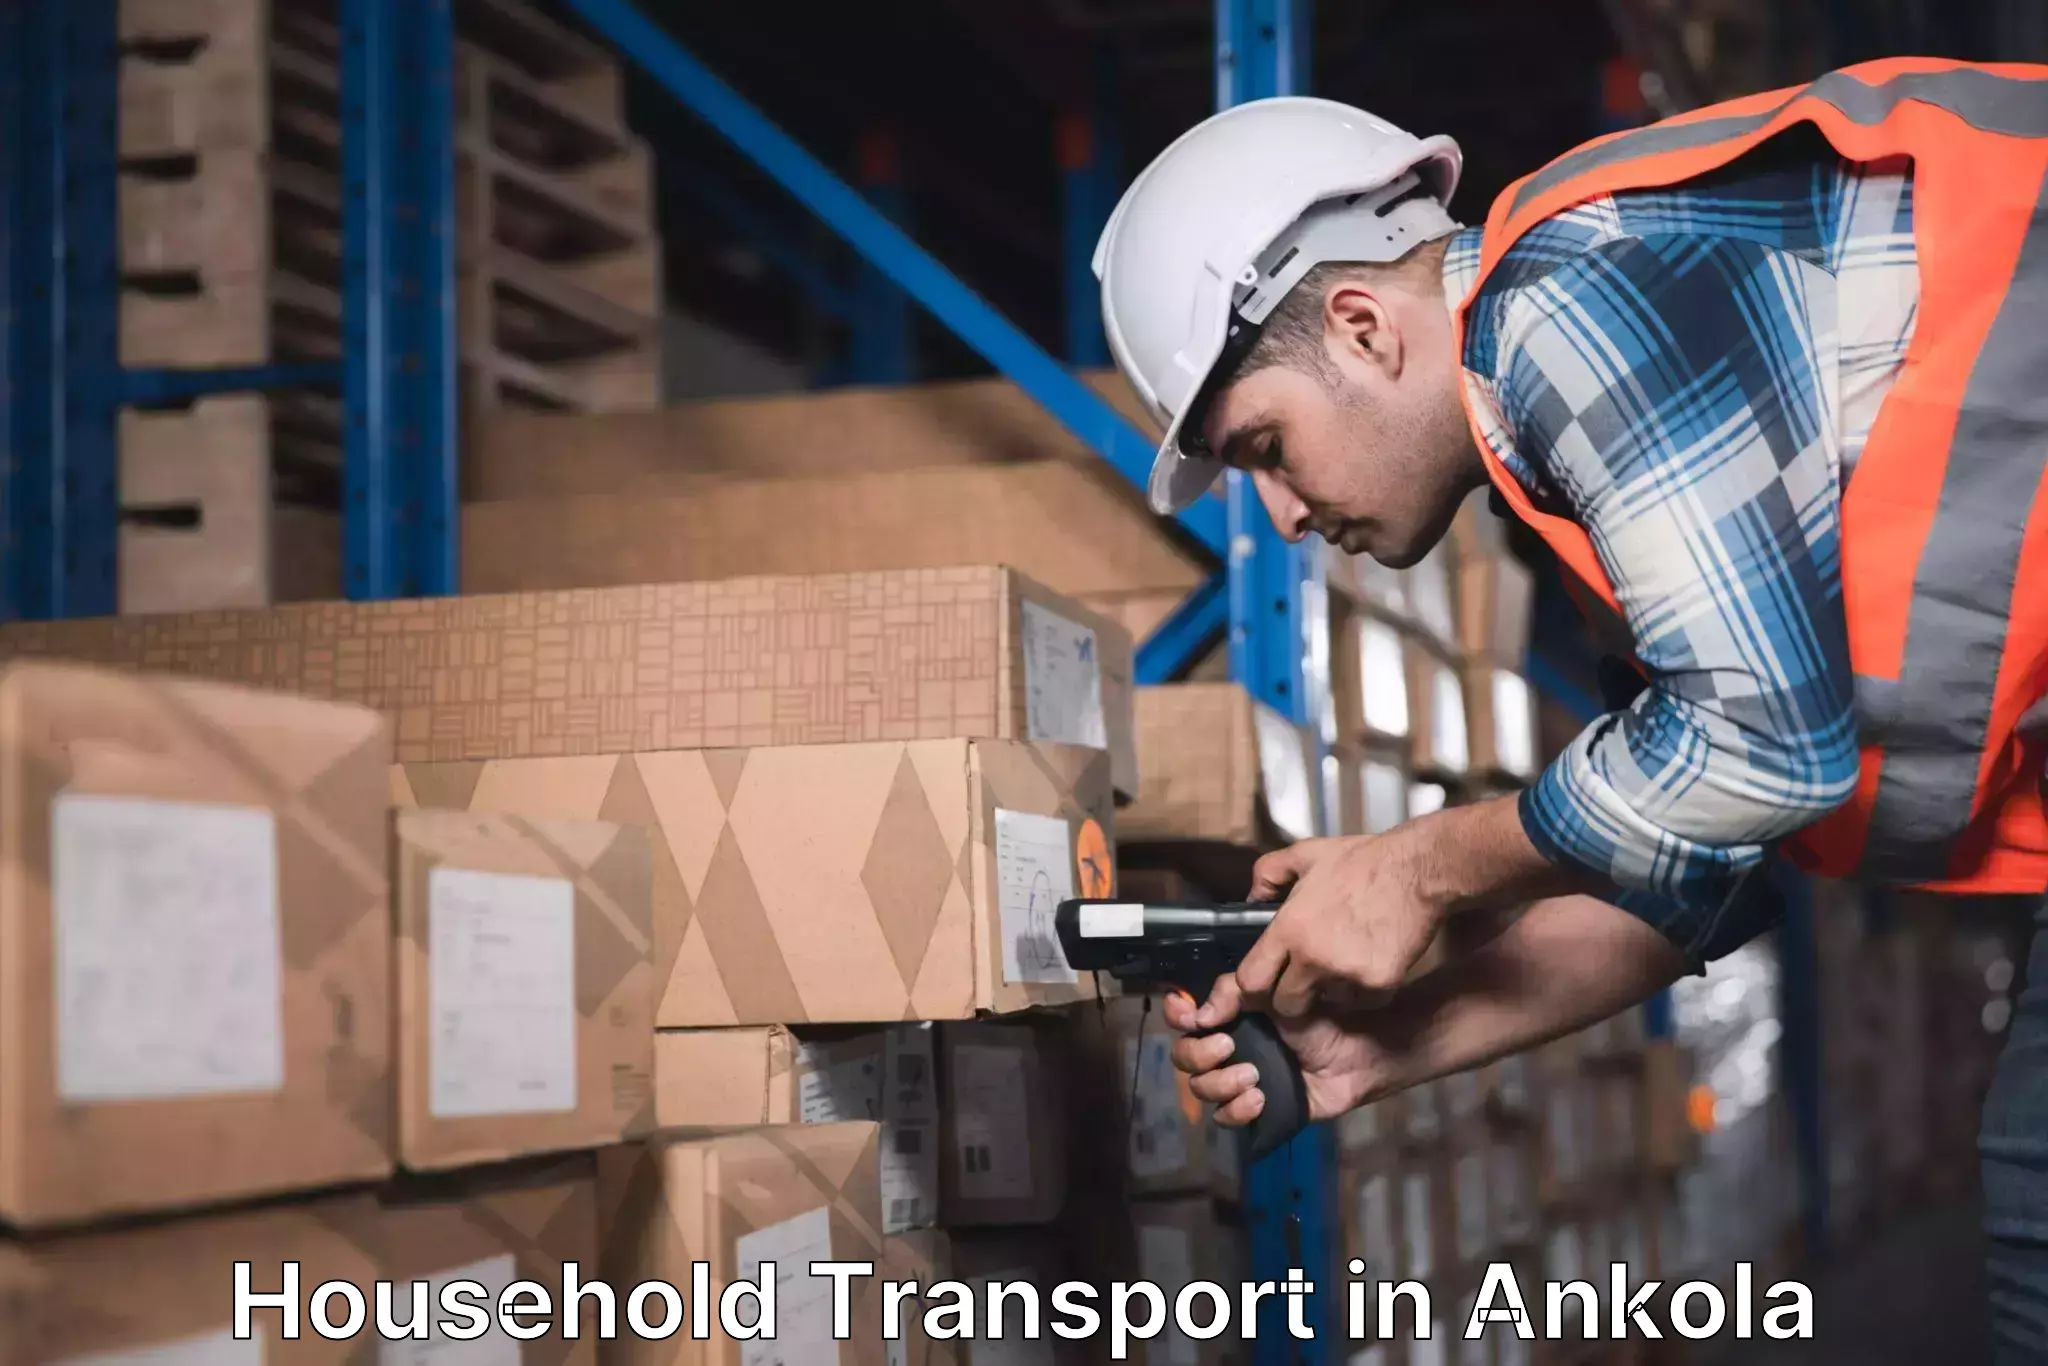 Household transport services in Ankola